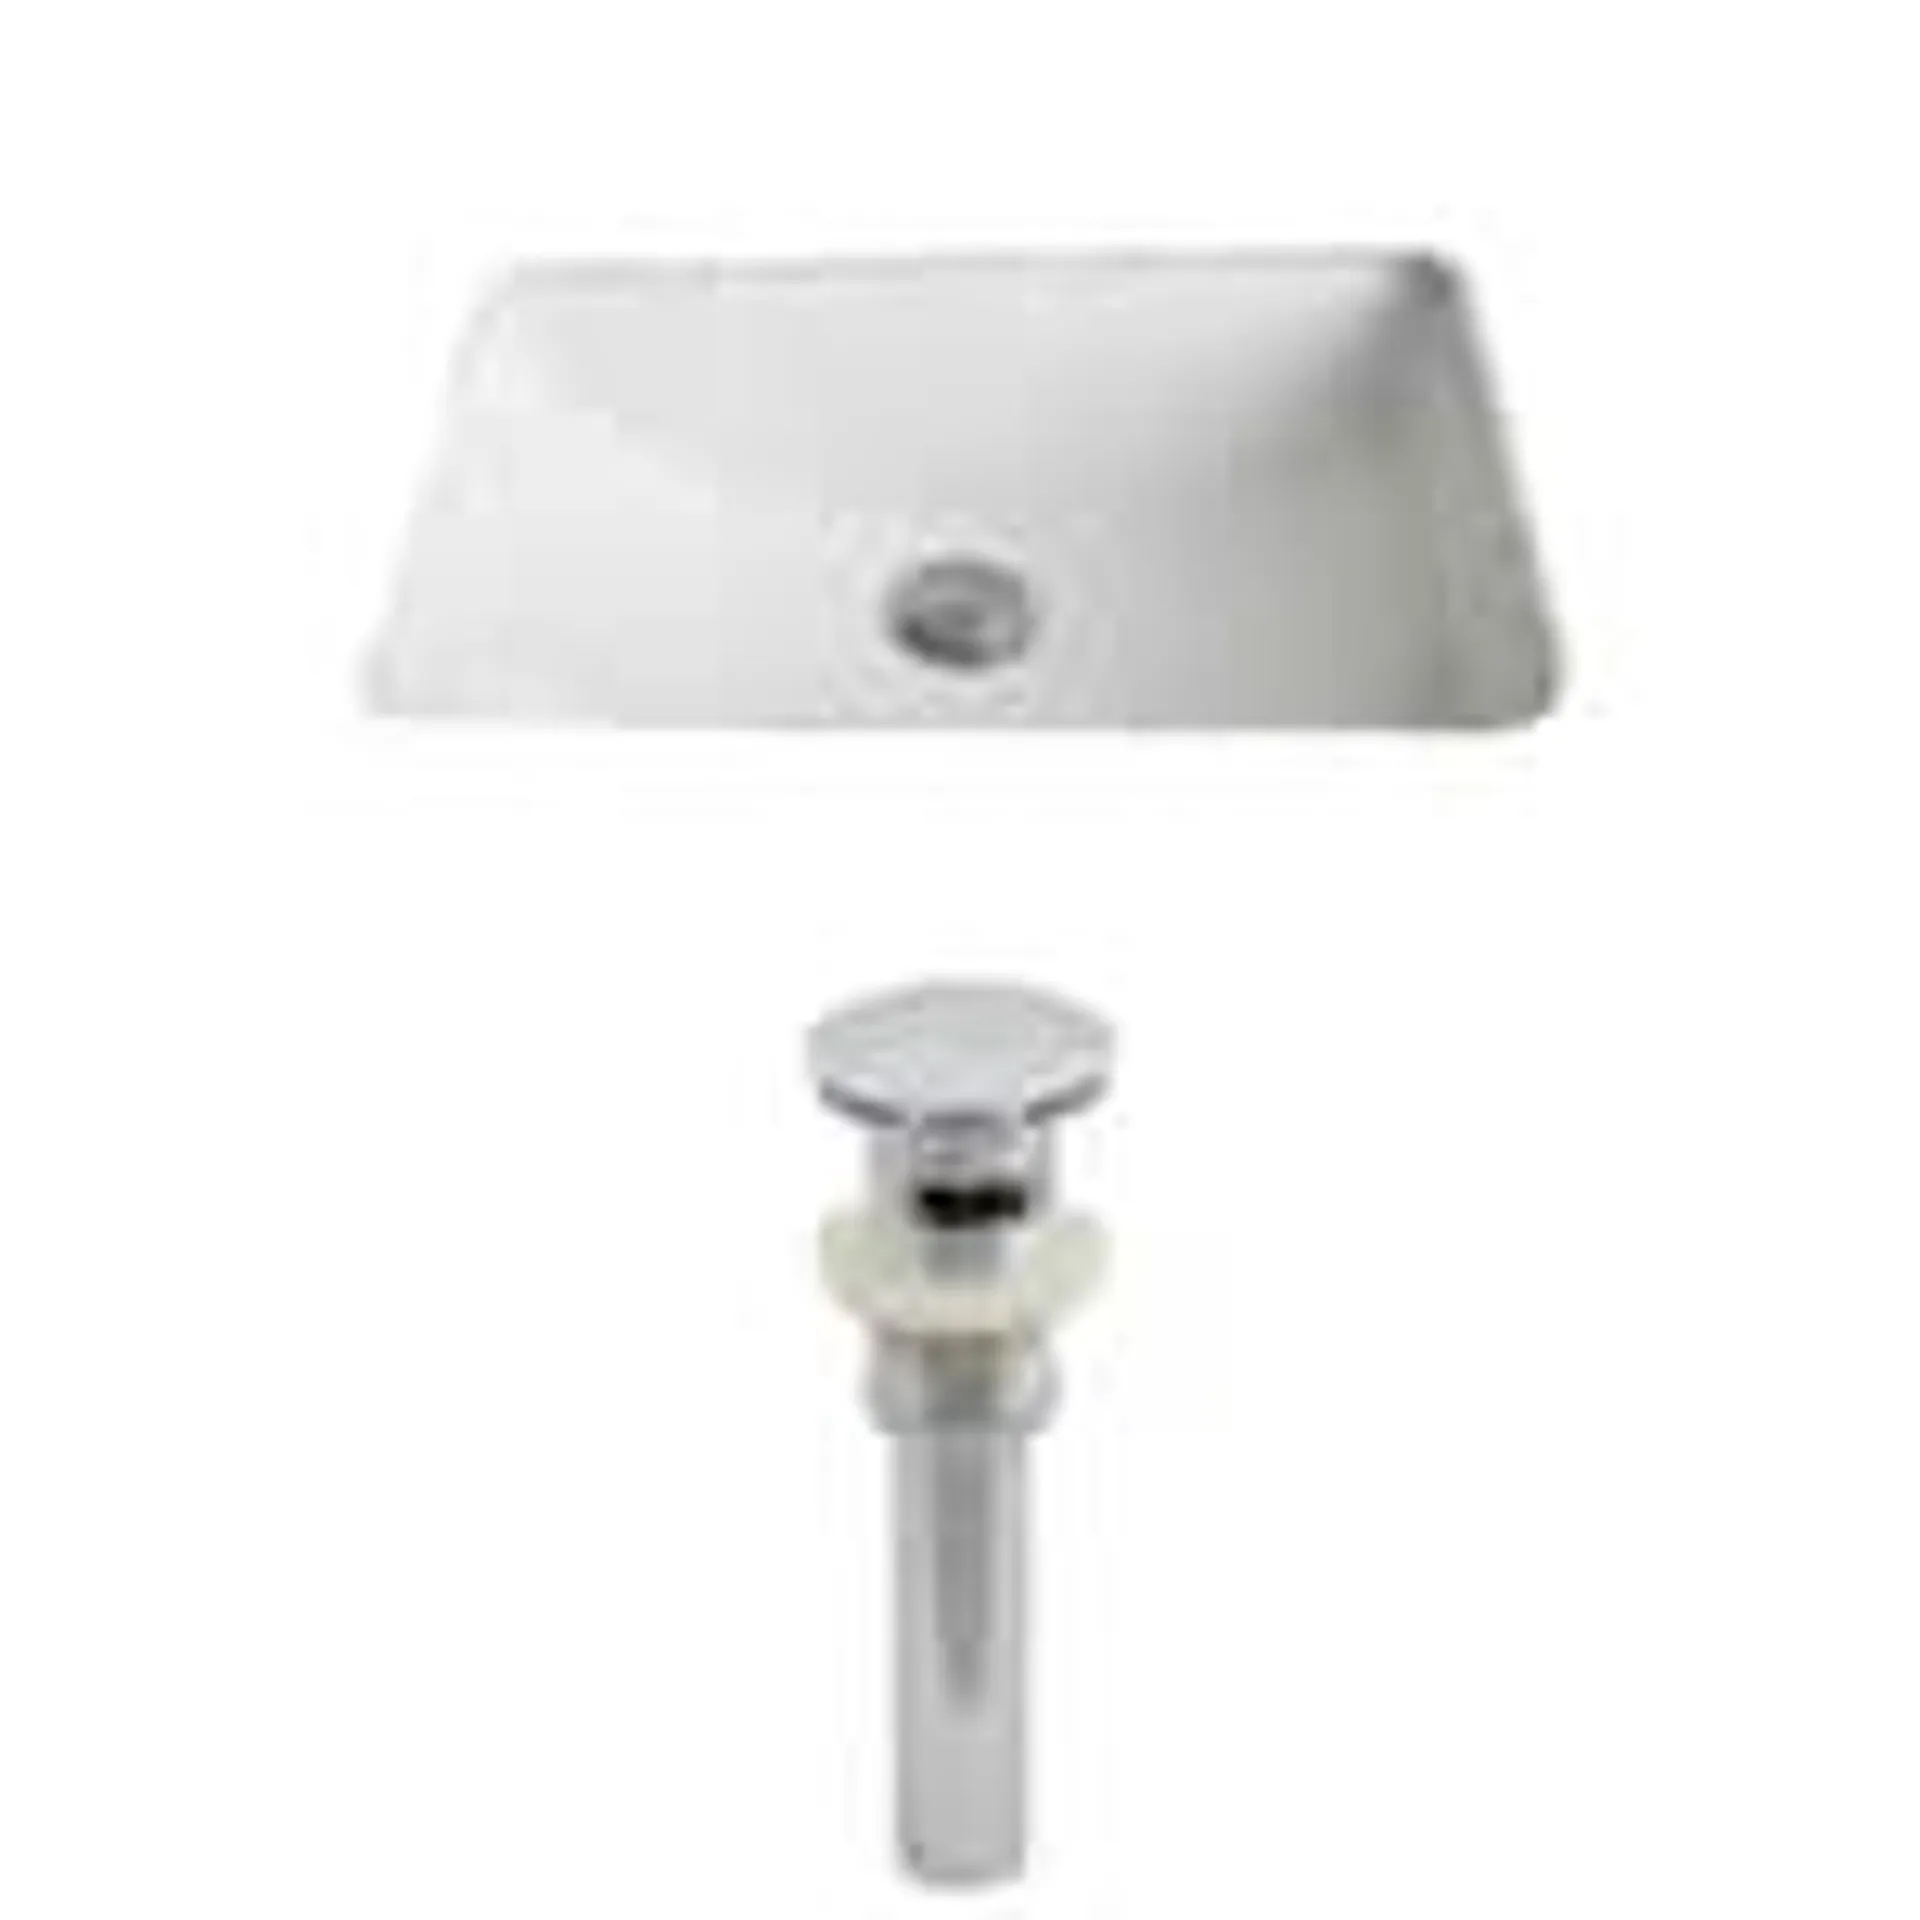 20.75-in. W Rectangle Bathroom Undermount Sink Set In White - Chrome Hardware - Overflow Drain Incl. AI-12807